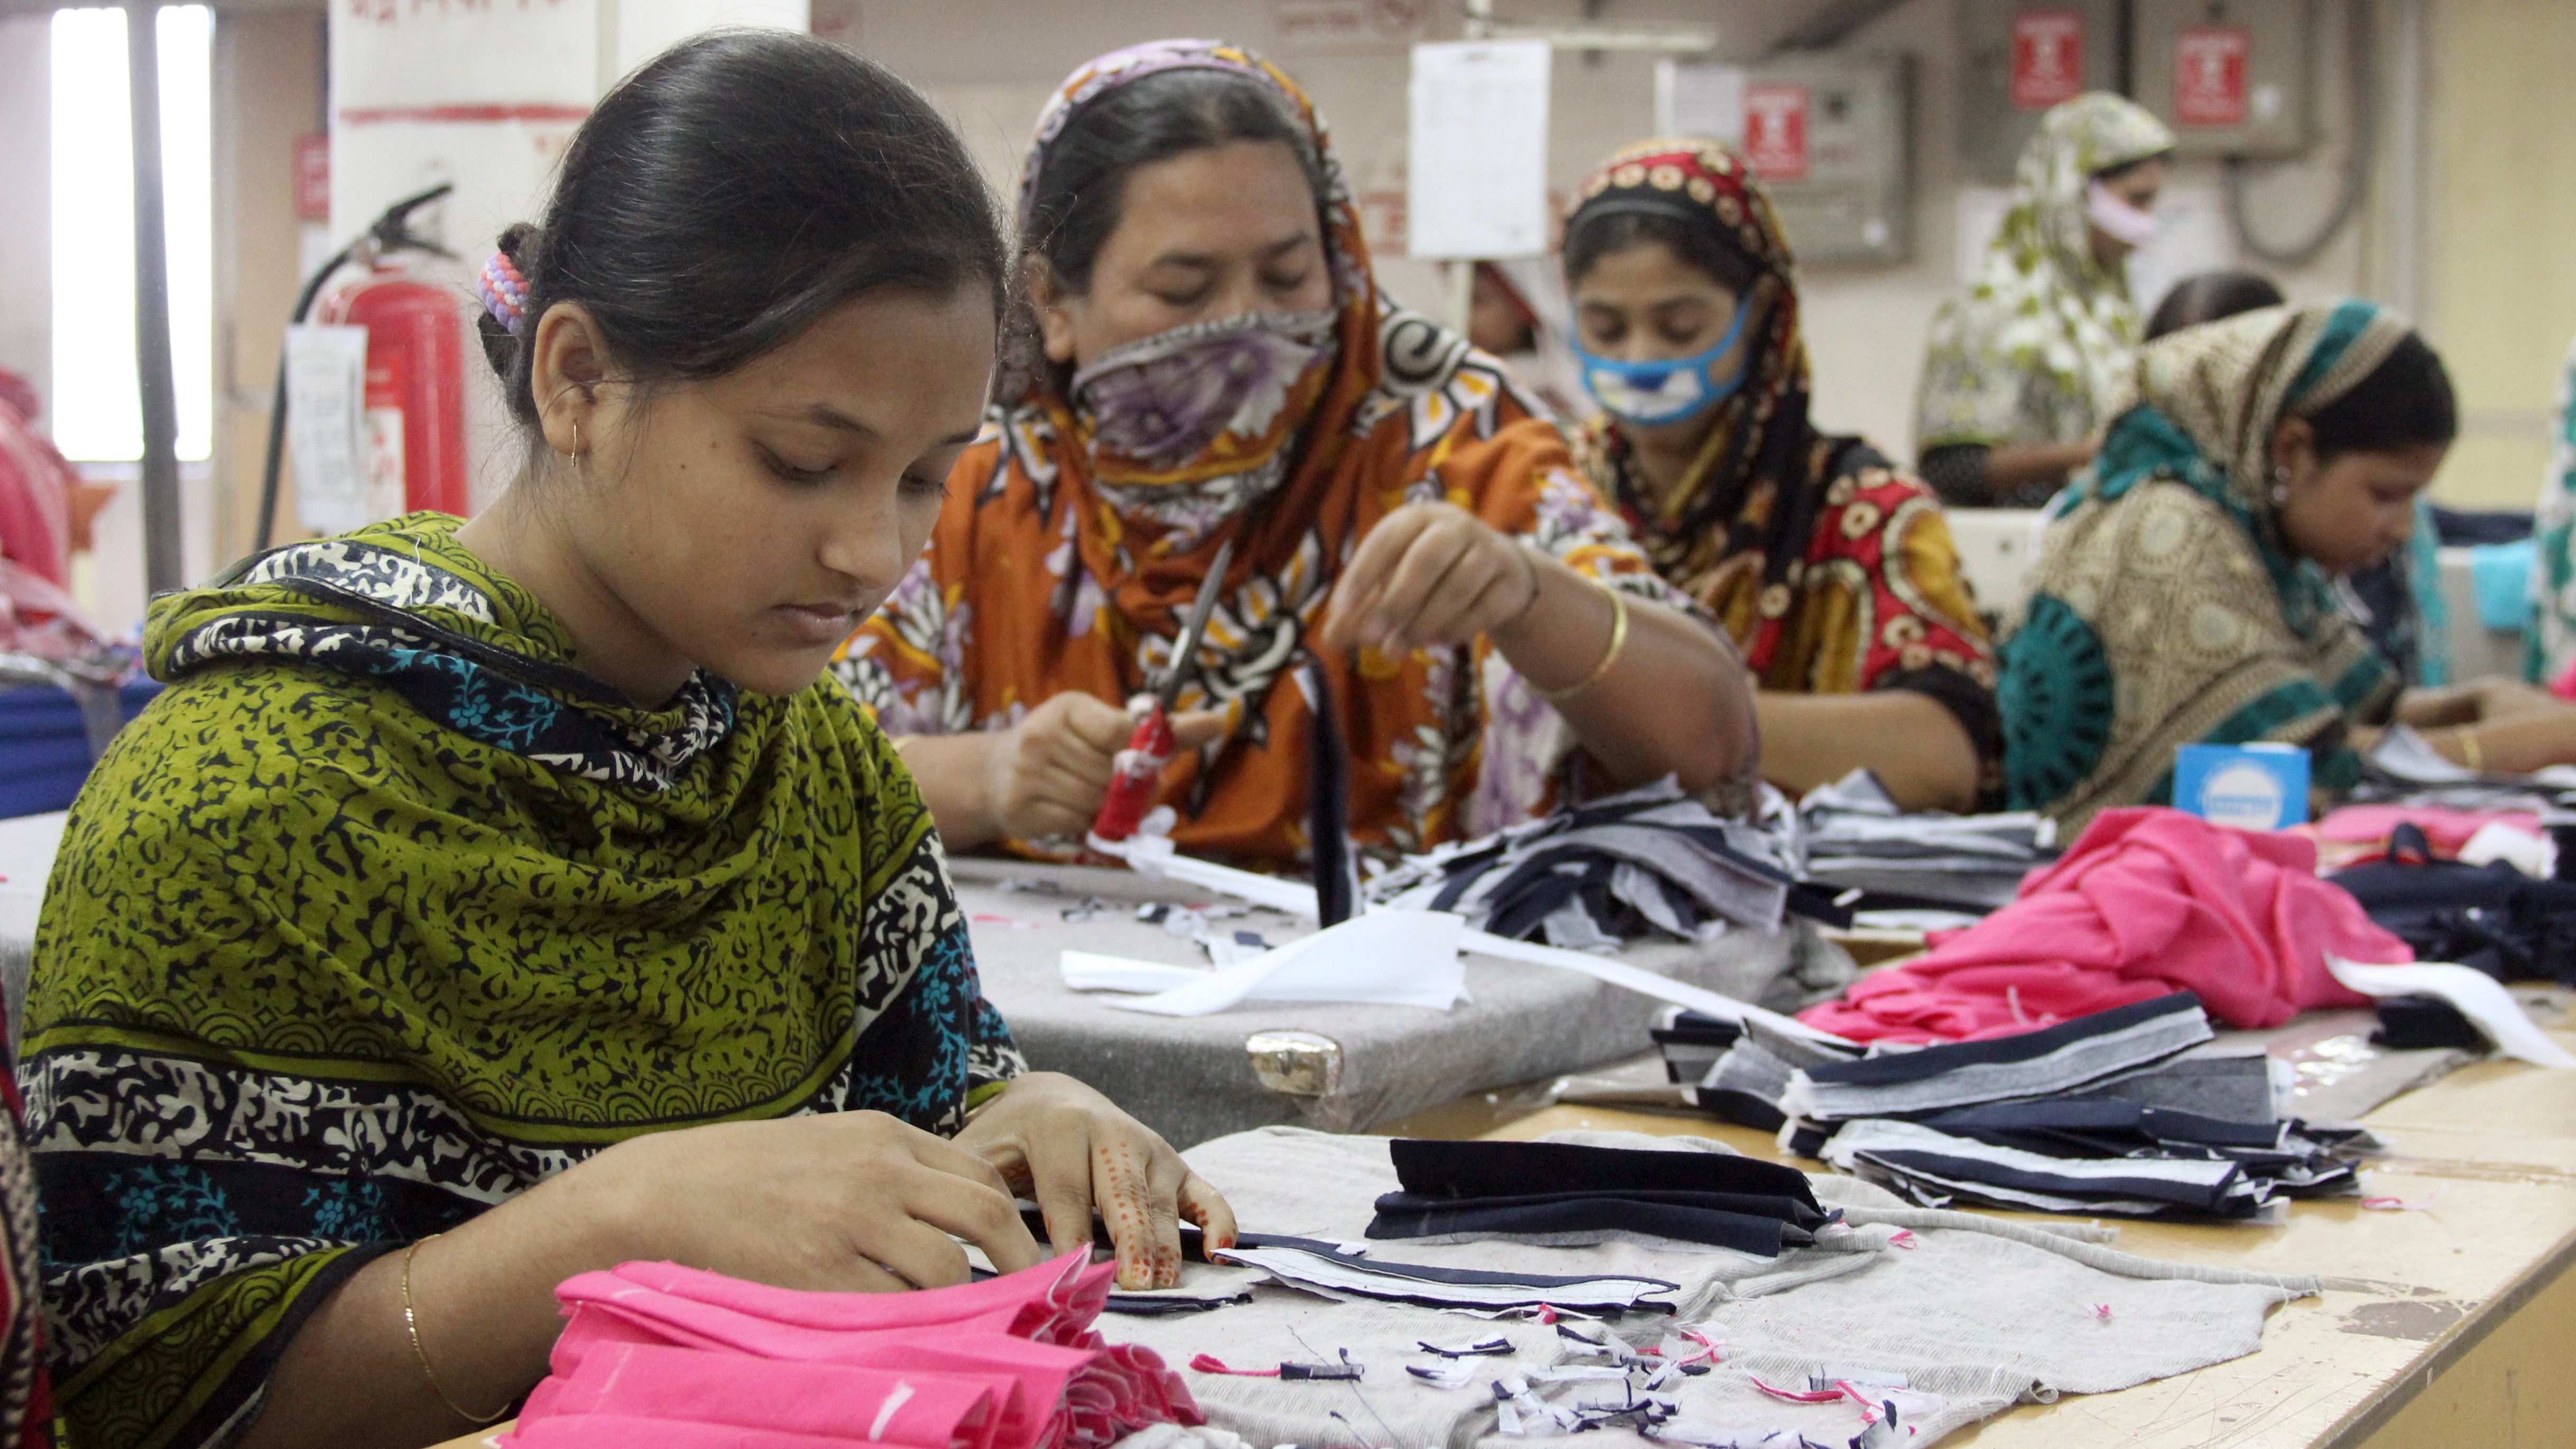 Women and men work in the textile factory 'One Composite Mills' in Gazipur, a suburb of Dhaka, Bangladesh, 03 January 2014. They make products for German mail-order company Klingel, sports articles producer Uhlsport (Kempa), Toys'R'Us, Desigual and Paul R. Smith - 500,000 pieces per month. Photo: Doreen Fiedler/dpa